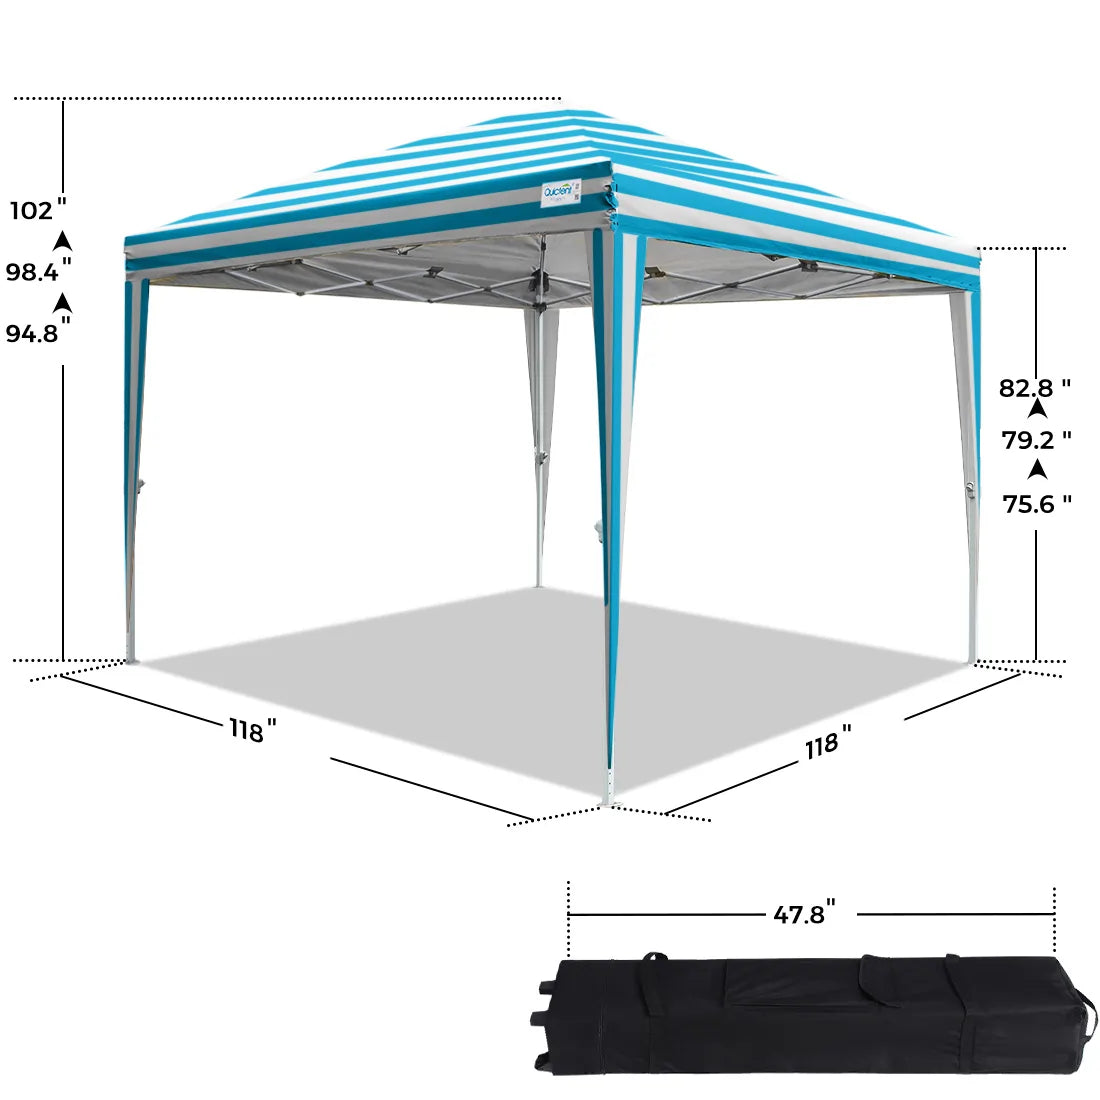 Striped blue color 10x10 canopy tent size#color_ white and blue